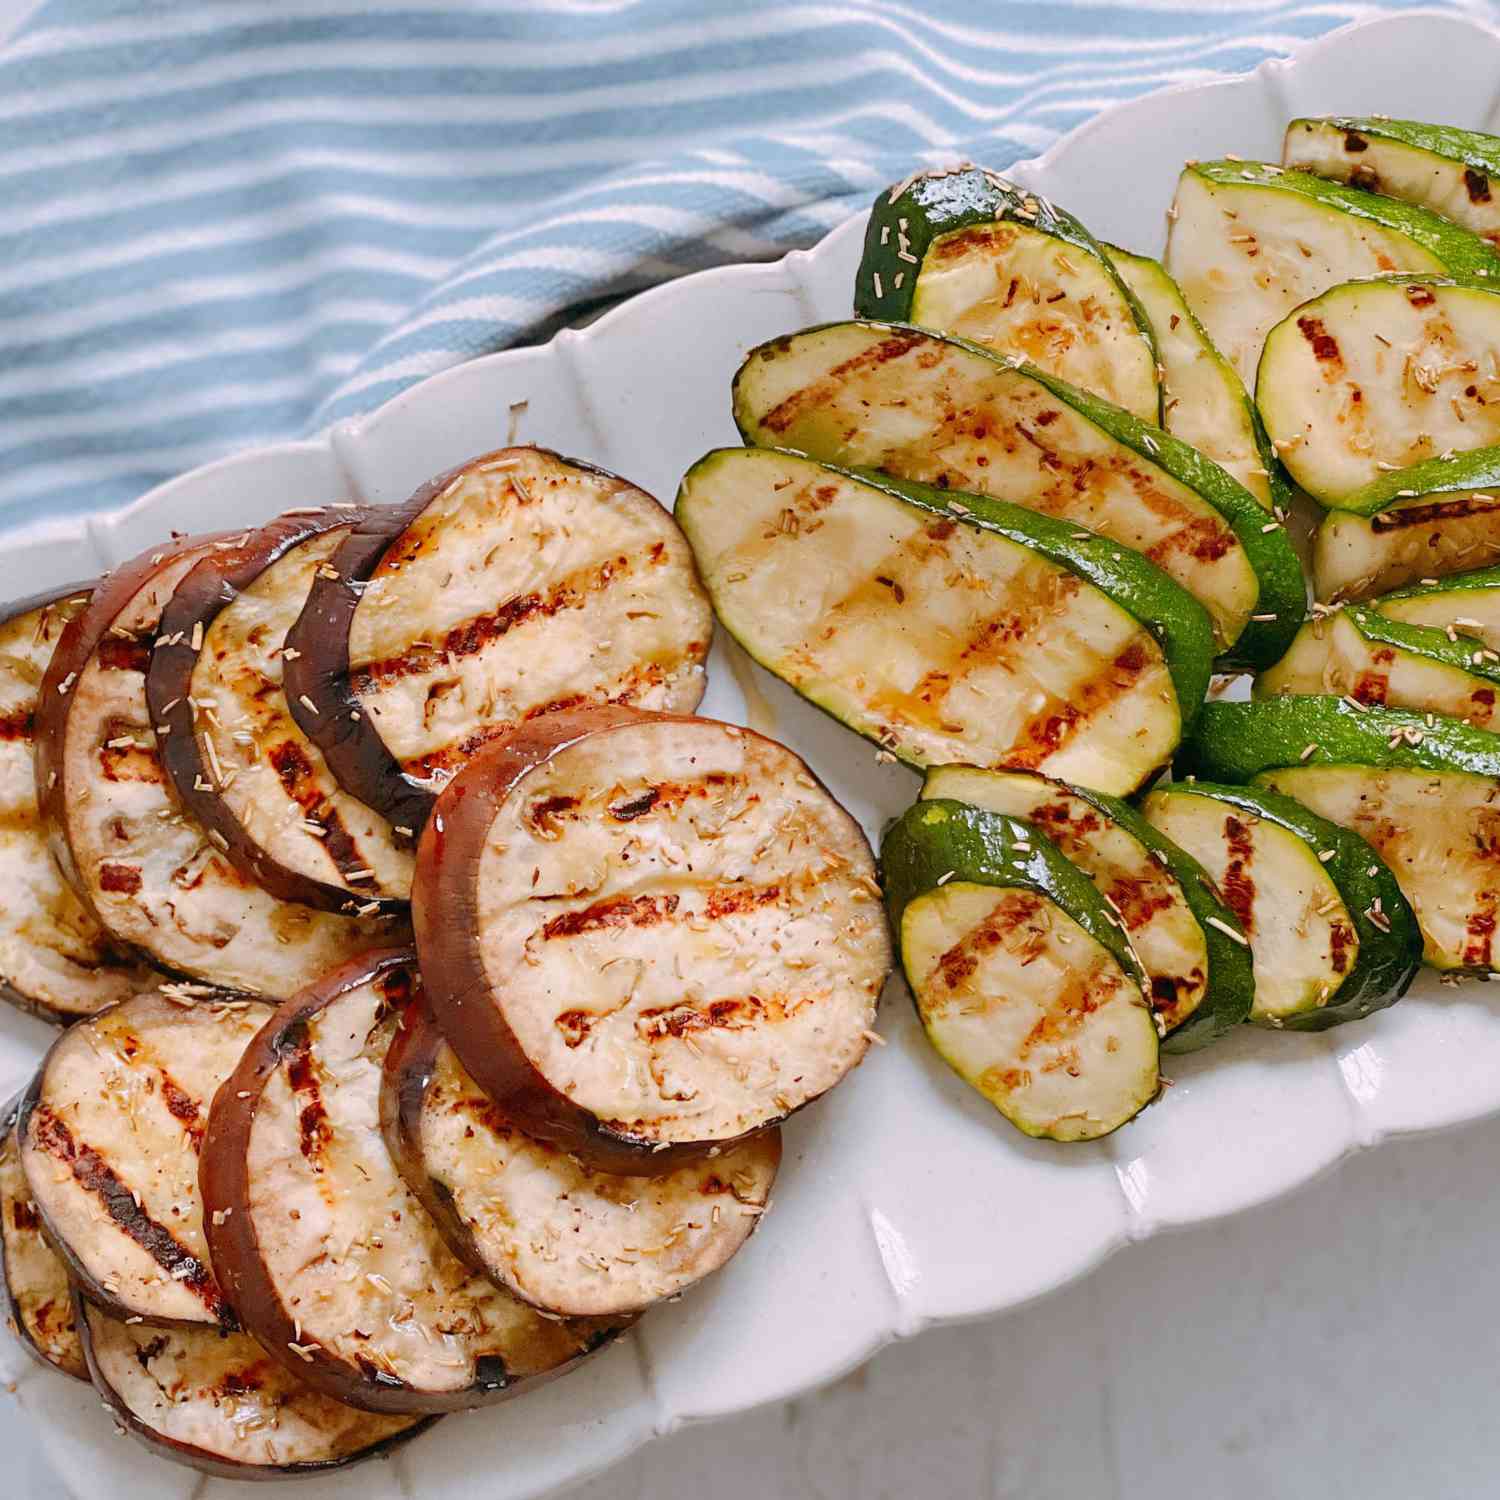 Grilled eggplant and zucchini